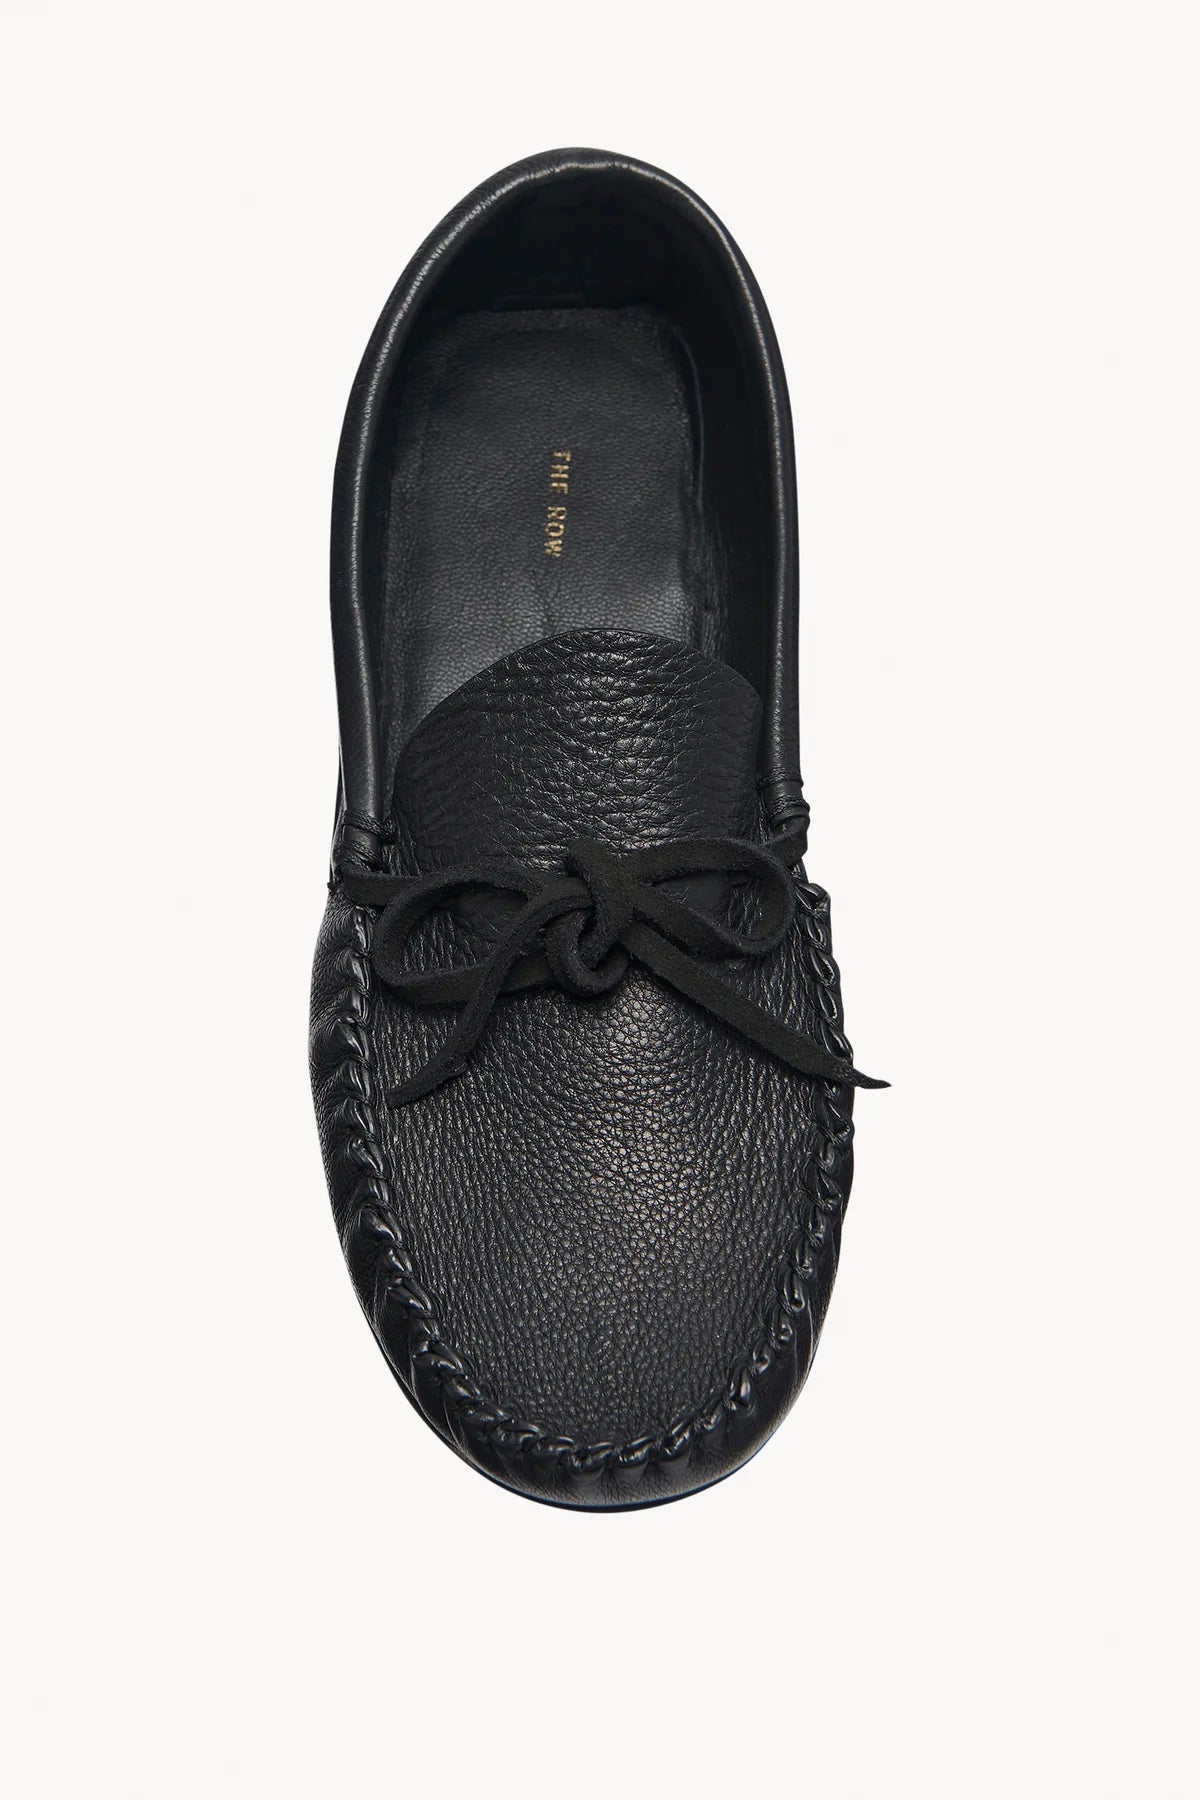 the-row-lucca-mocassin-black-amarees